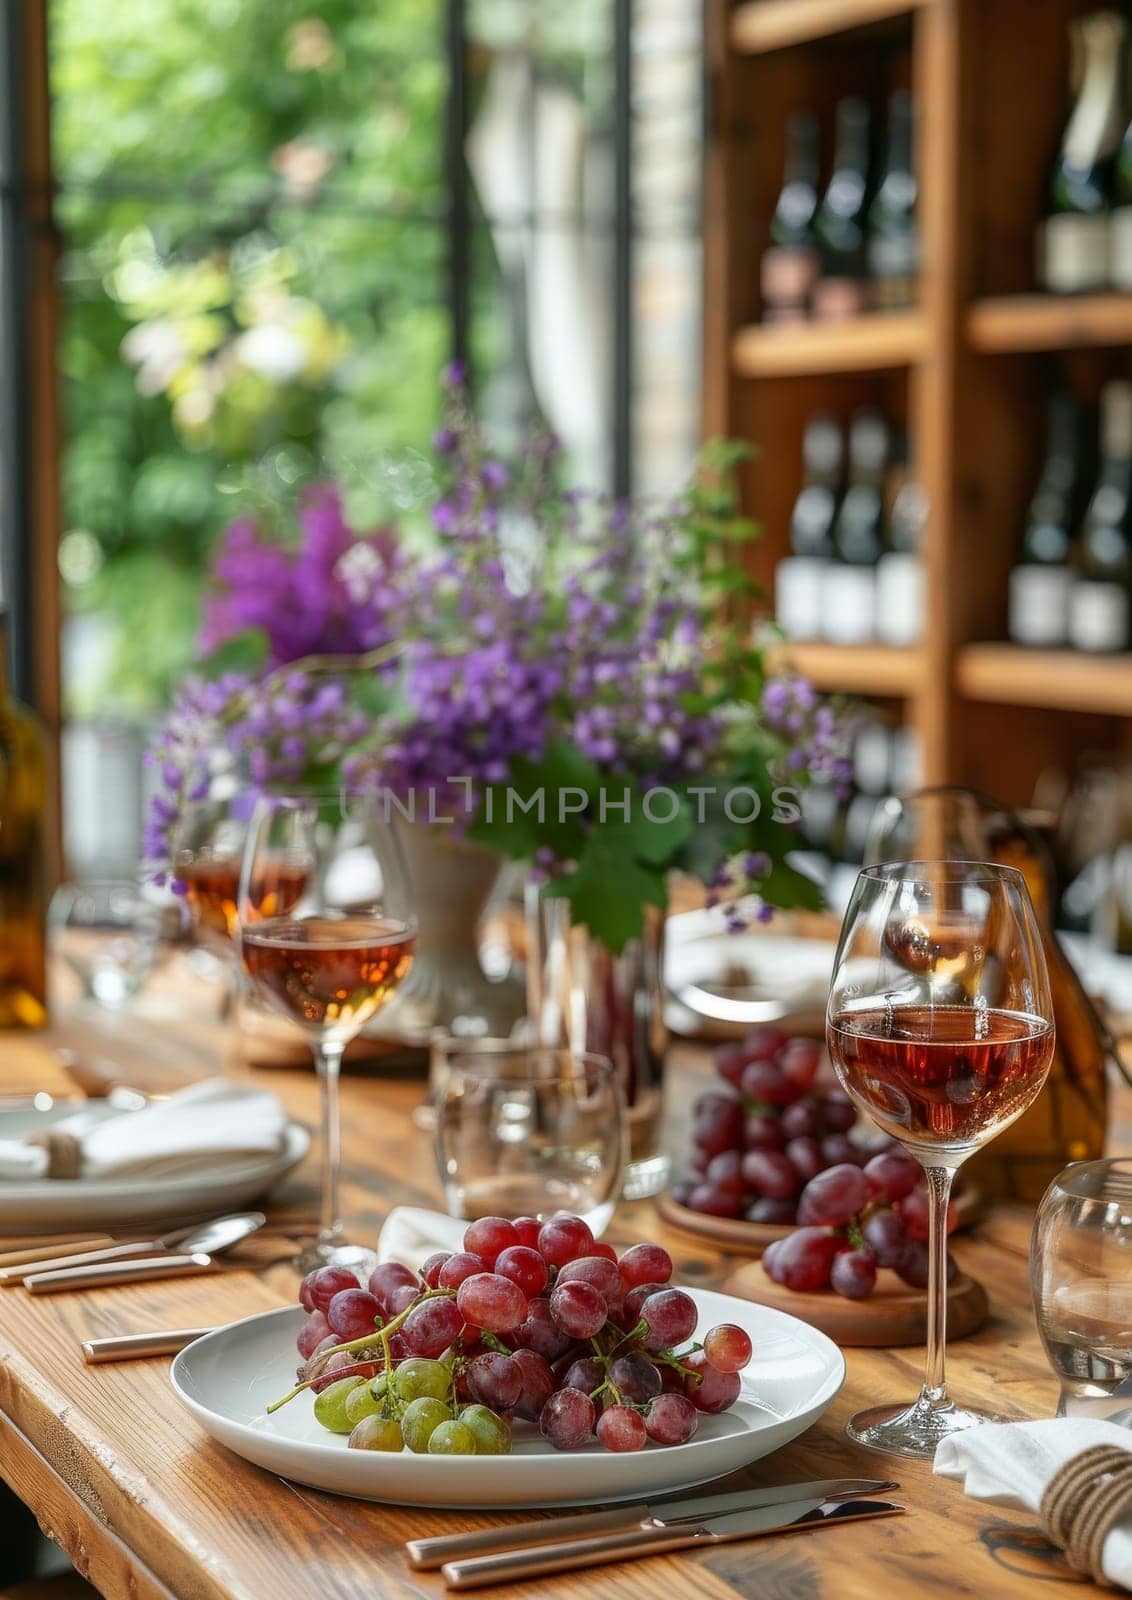 A bottle of wine sits on a table next to two wine glasses and a plate of grapes. The scene is set in a restaurant, with a dining table and chairs surrounding the wine glasses and grapes